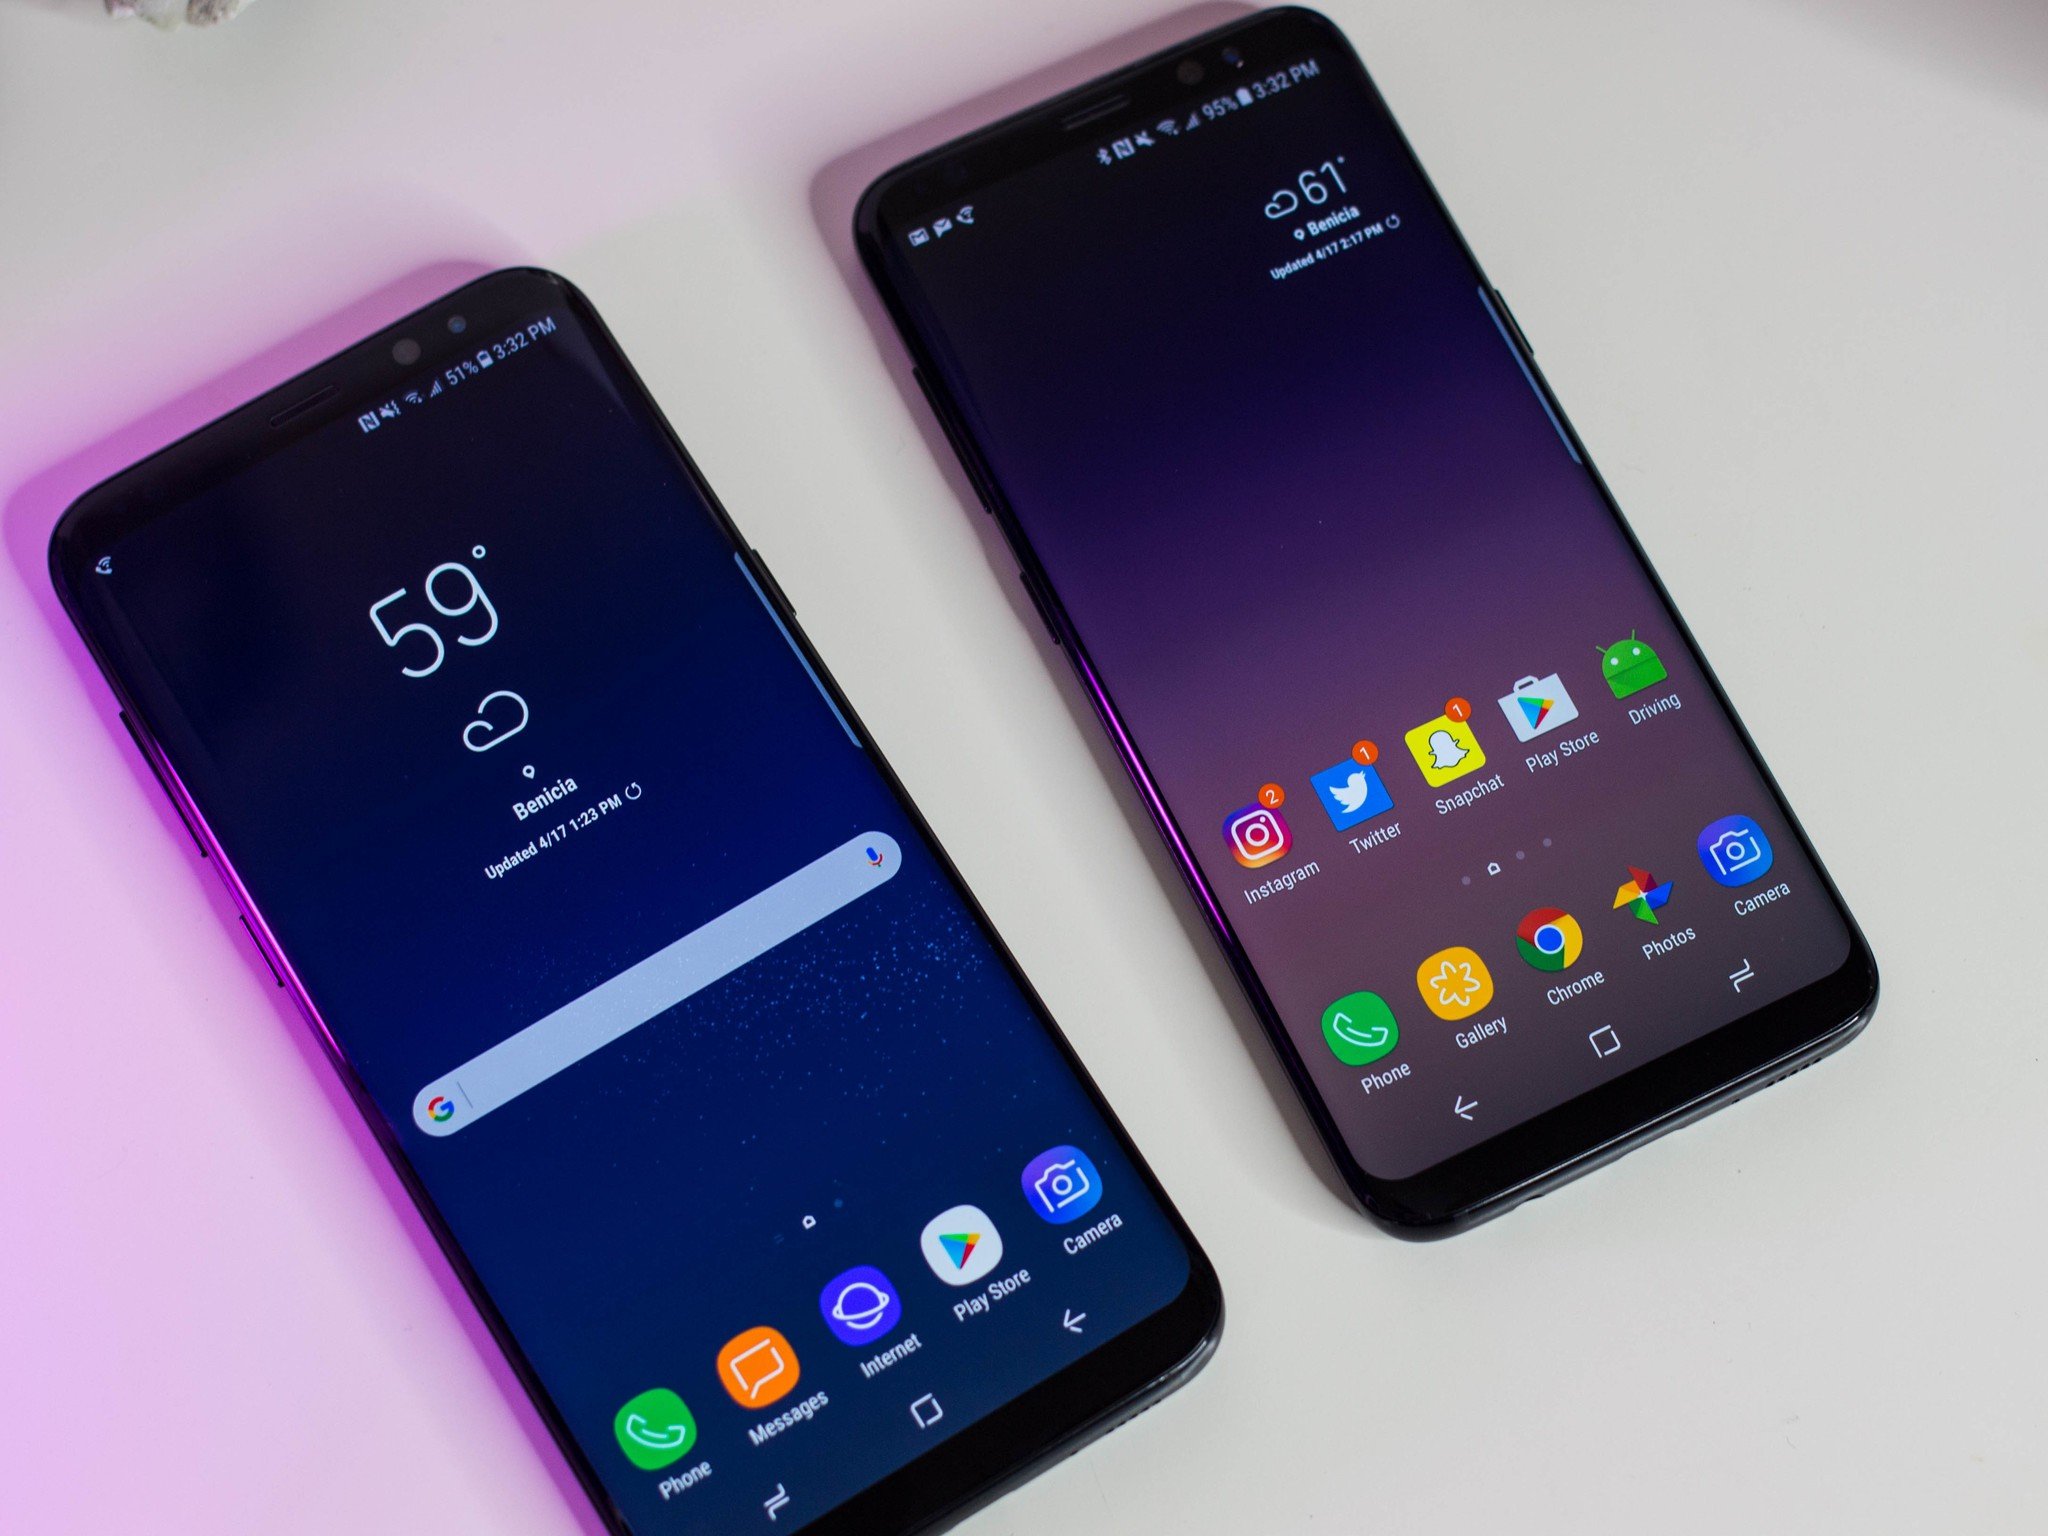 The Galaxy S8+ and Galaxy S8.